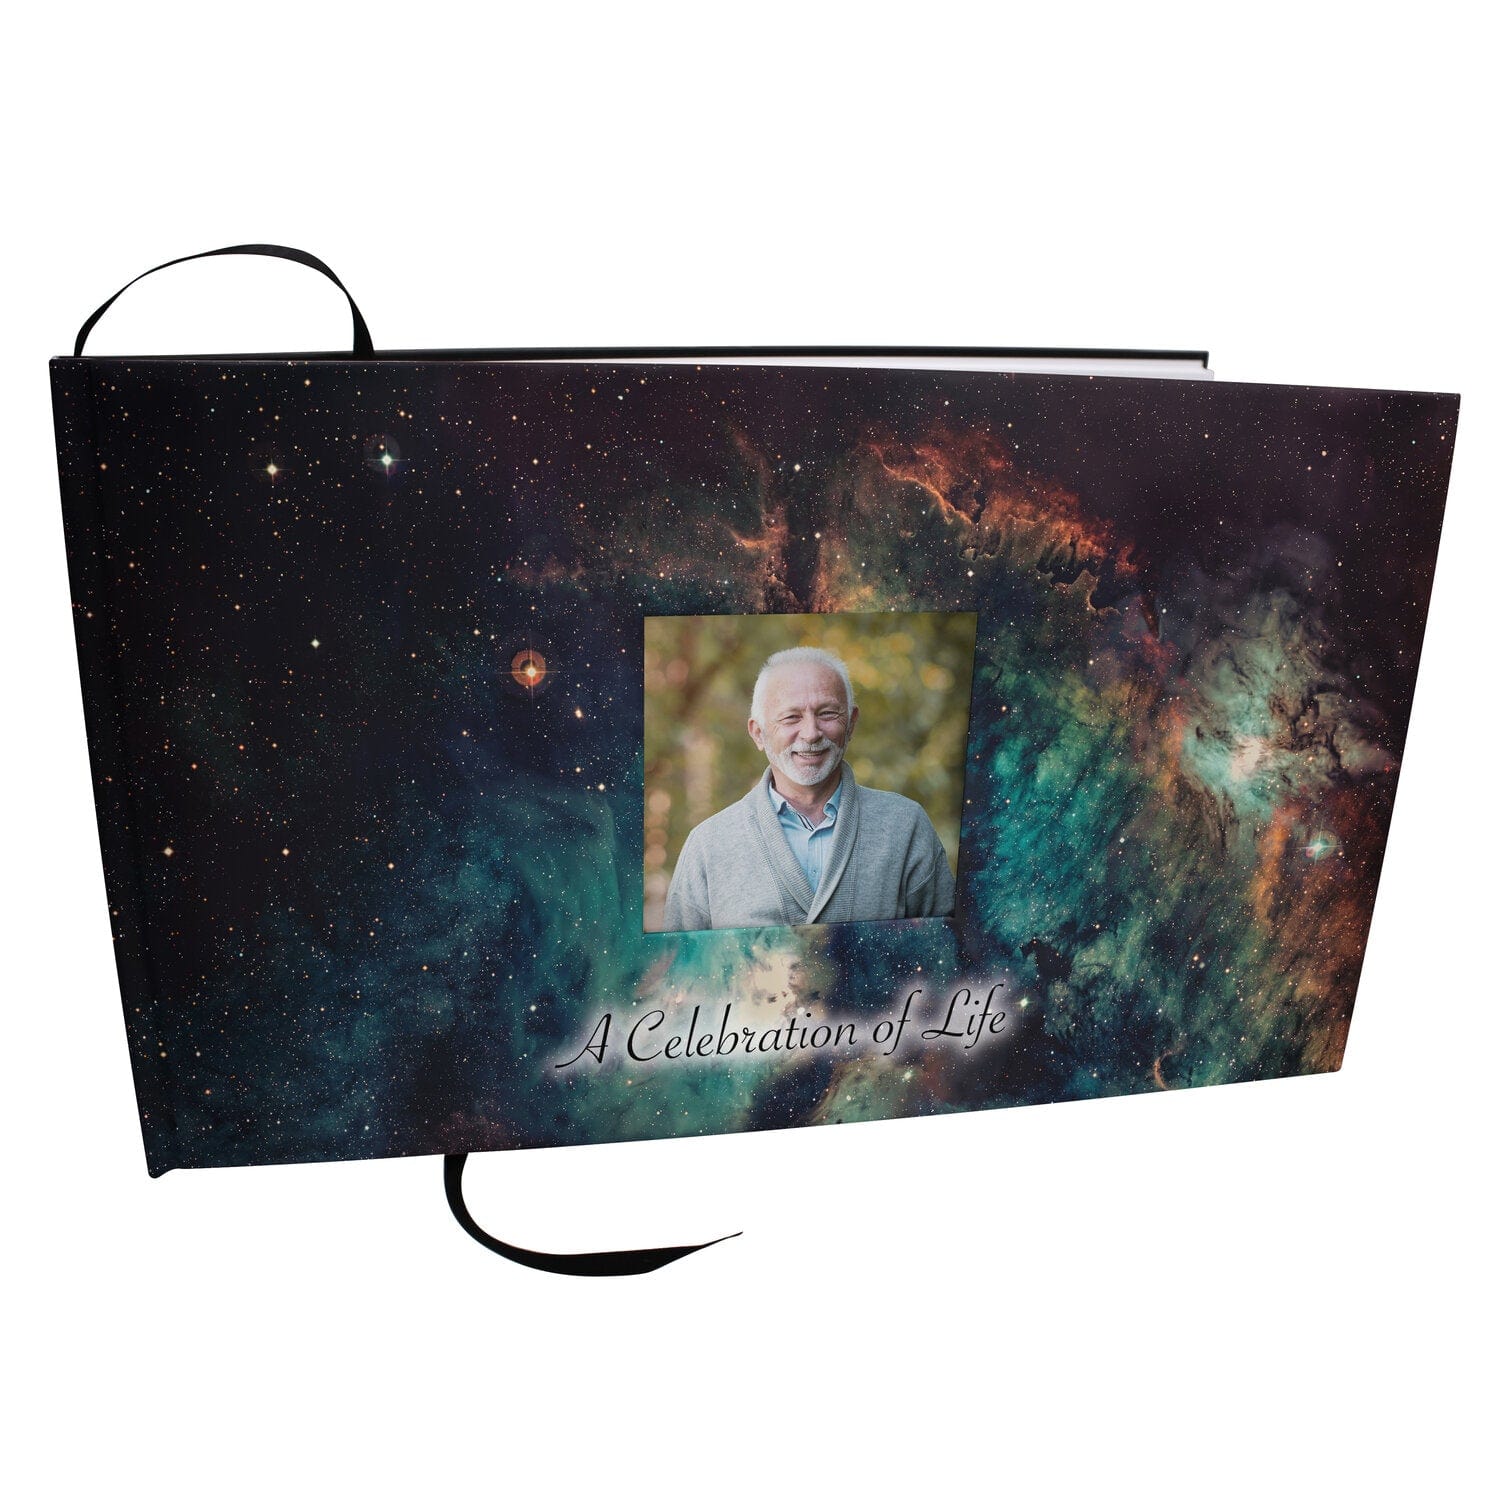 Commemorative Cremation Urns Supernova Galaxy Matching Themed 'Celebration of Life' Guest Book for Funeral or Memorial Service